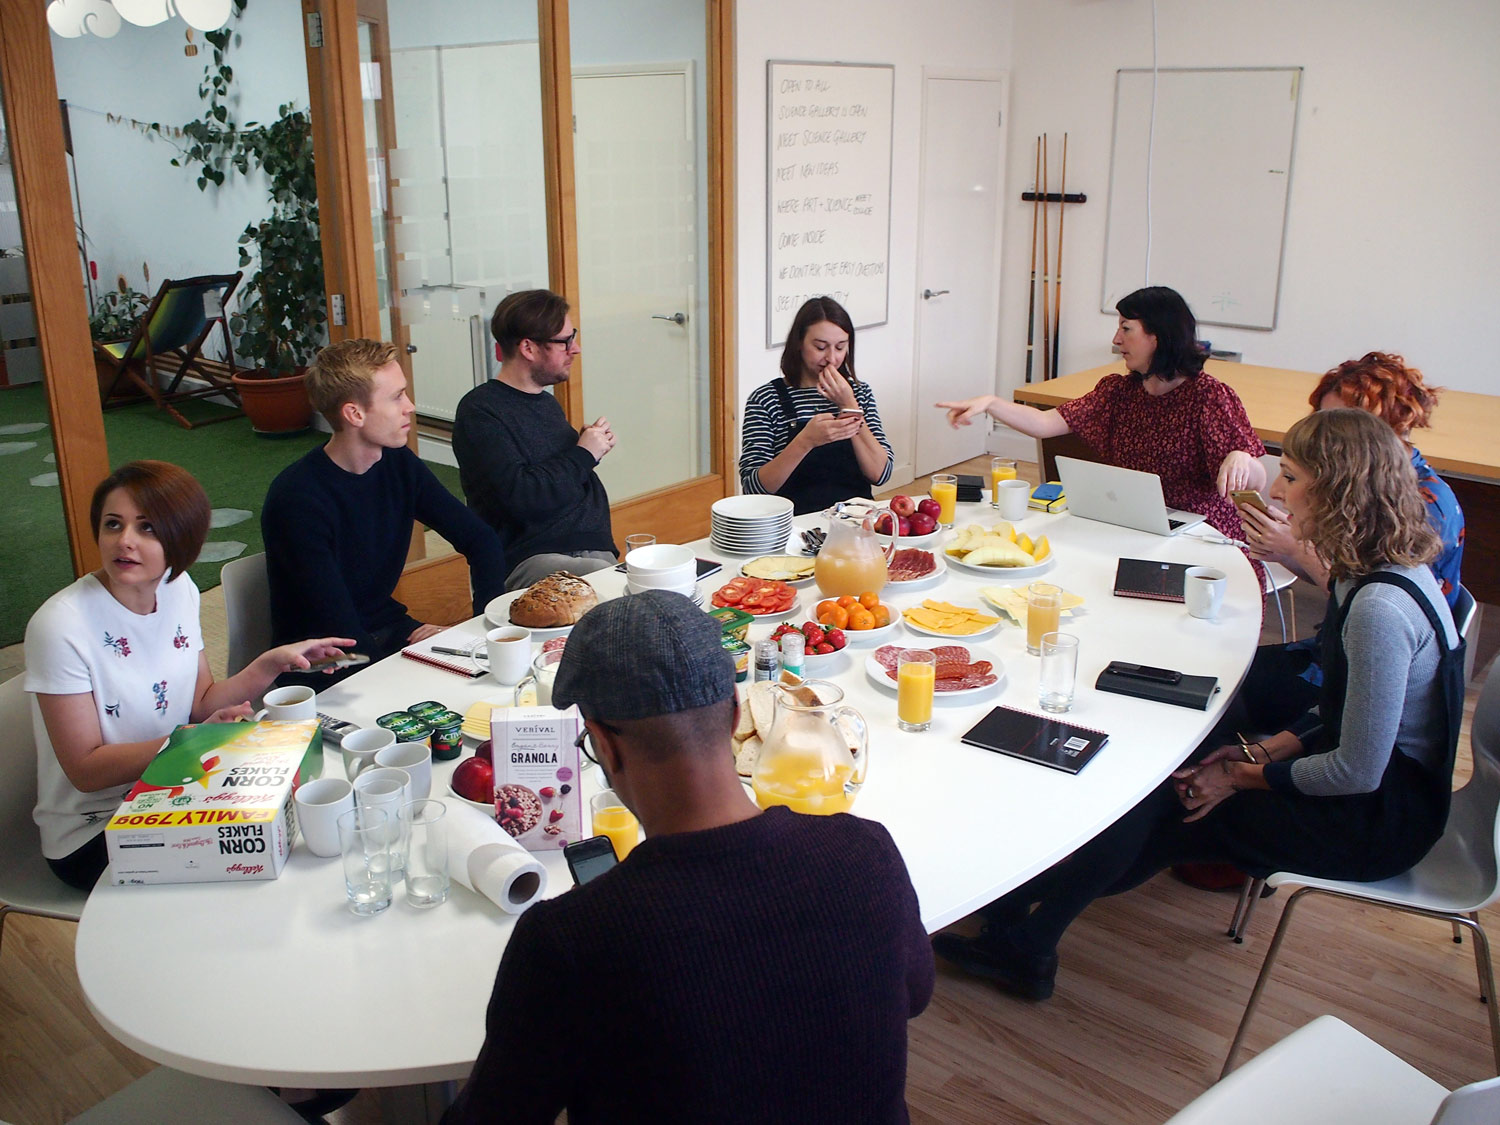 MHM's Jo Taylor briefing the Cog team, over brunch in our studio.